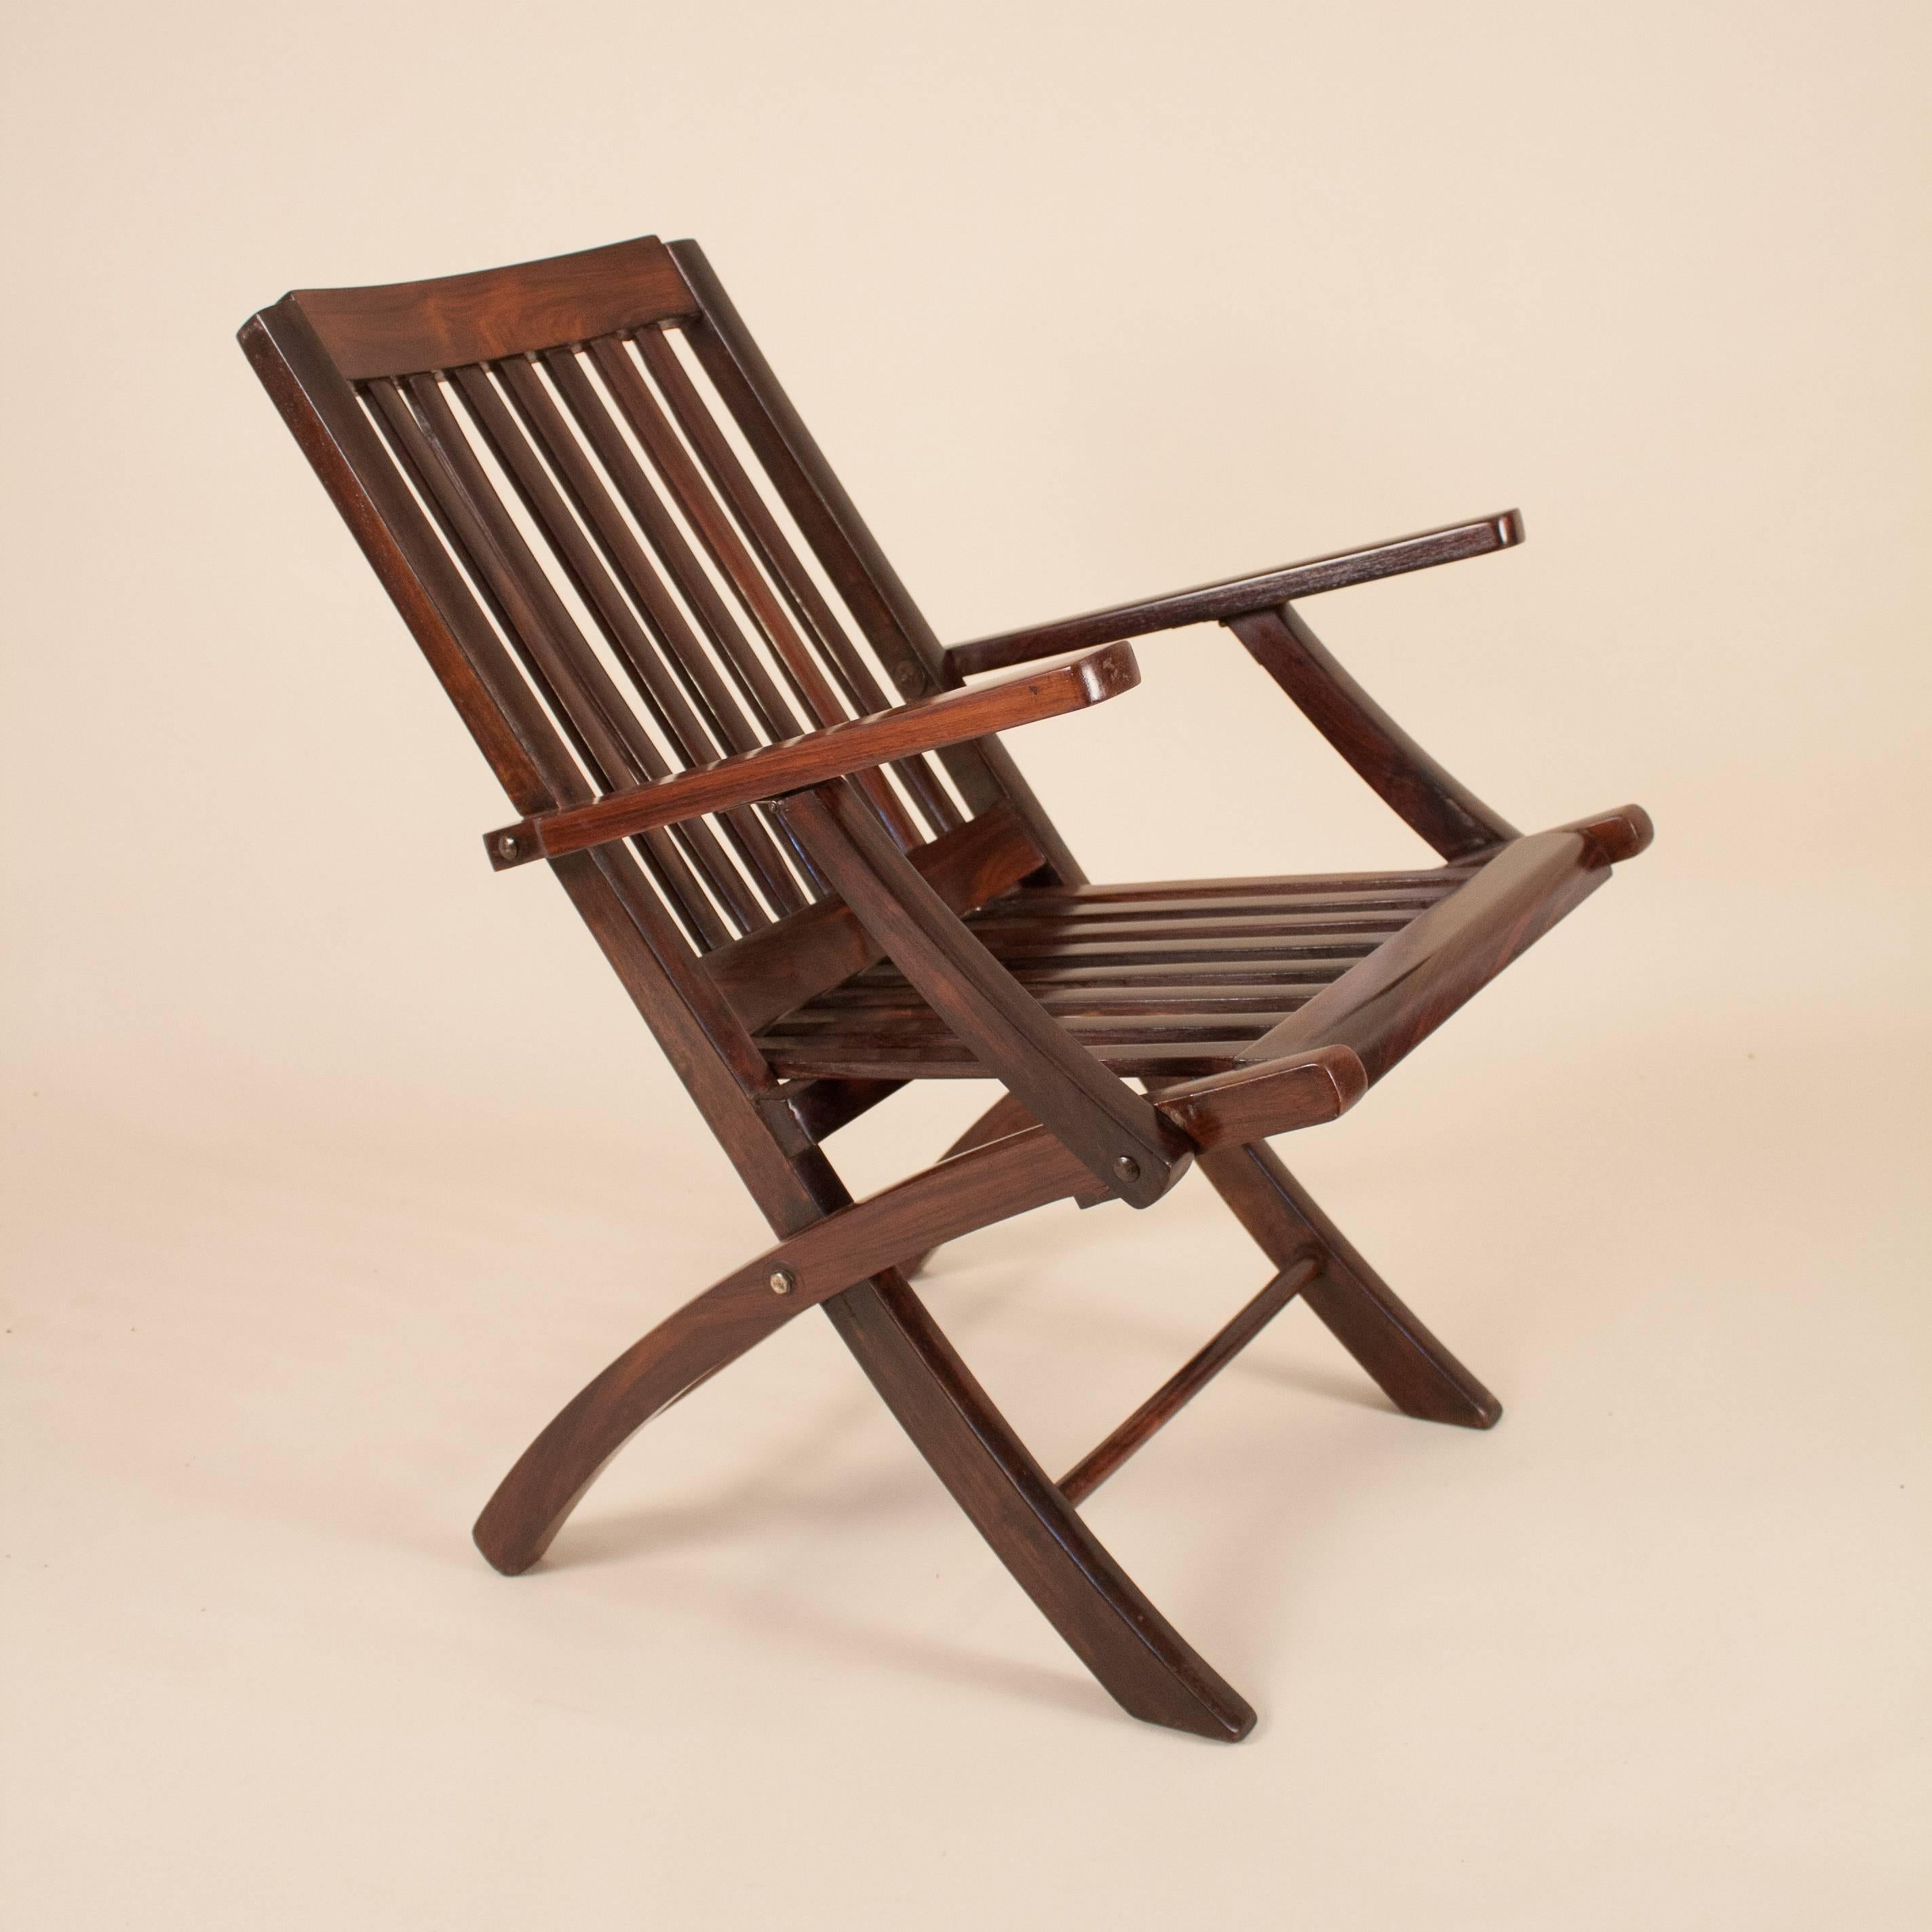 English Pair of Rosewood Folding Steamer Deck Chairs